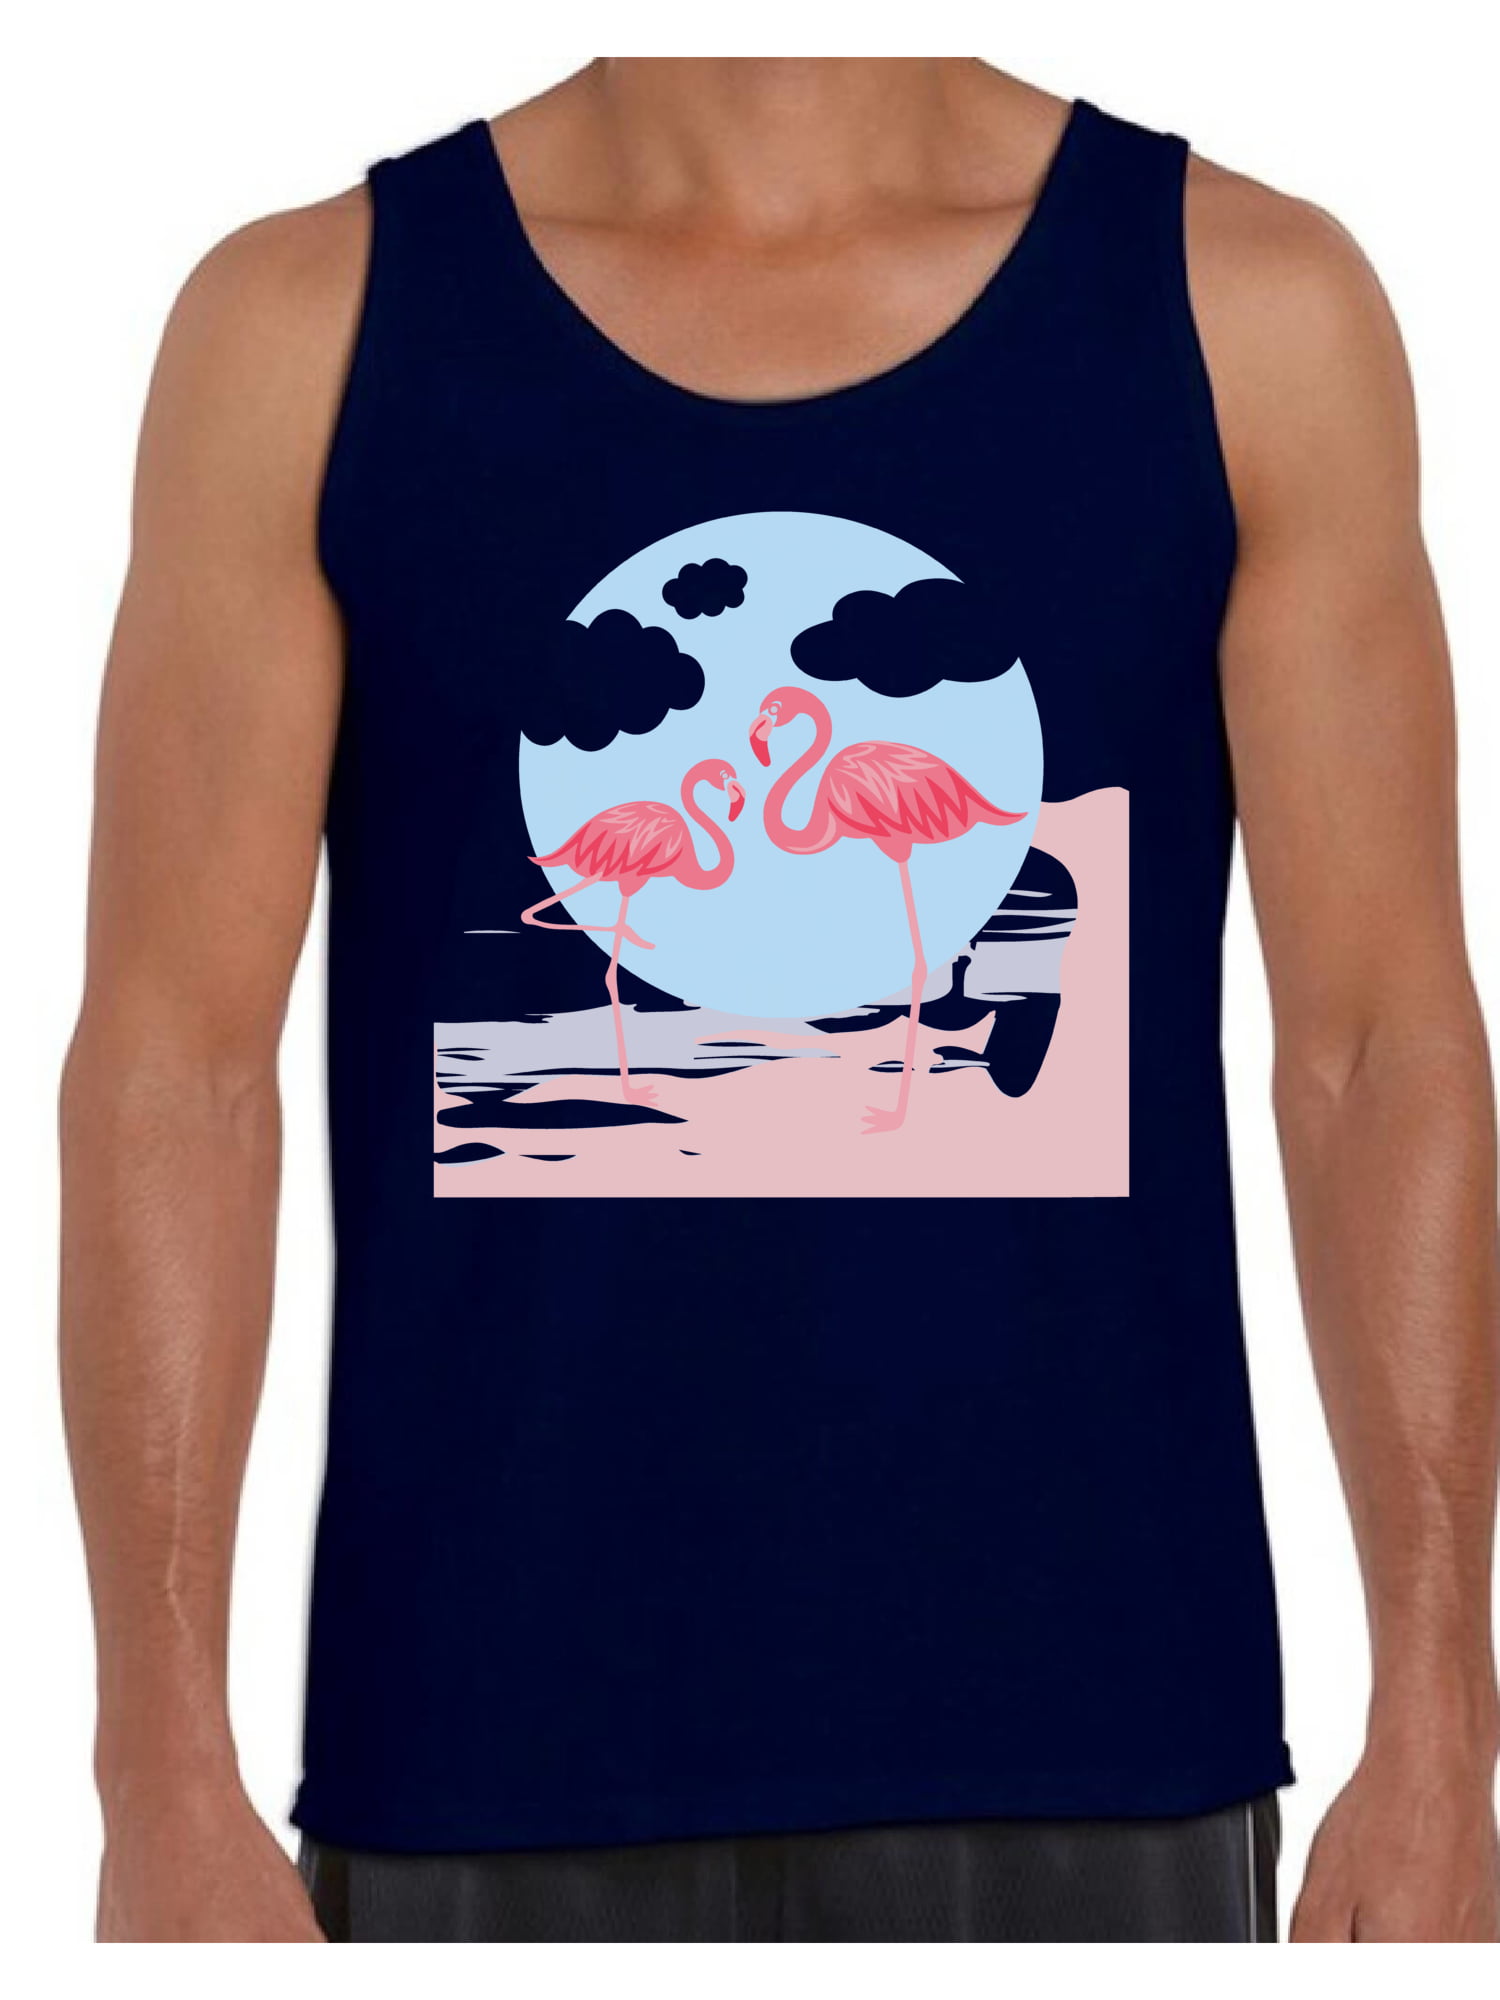 Awkward Styles Two Flamingos Shirts Beach Collection for Men Pink ...